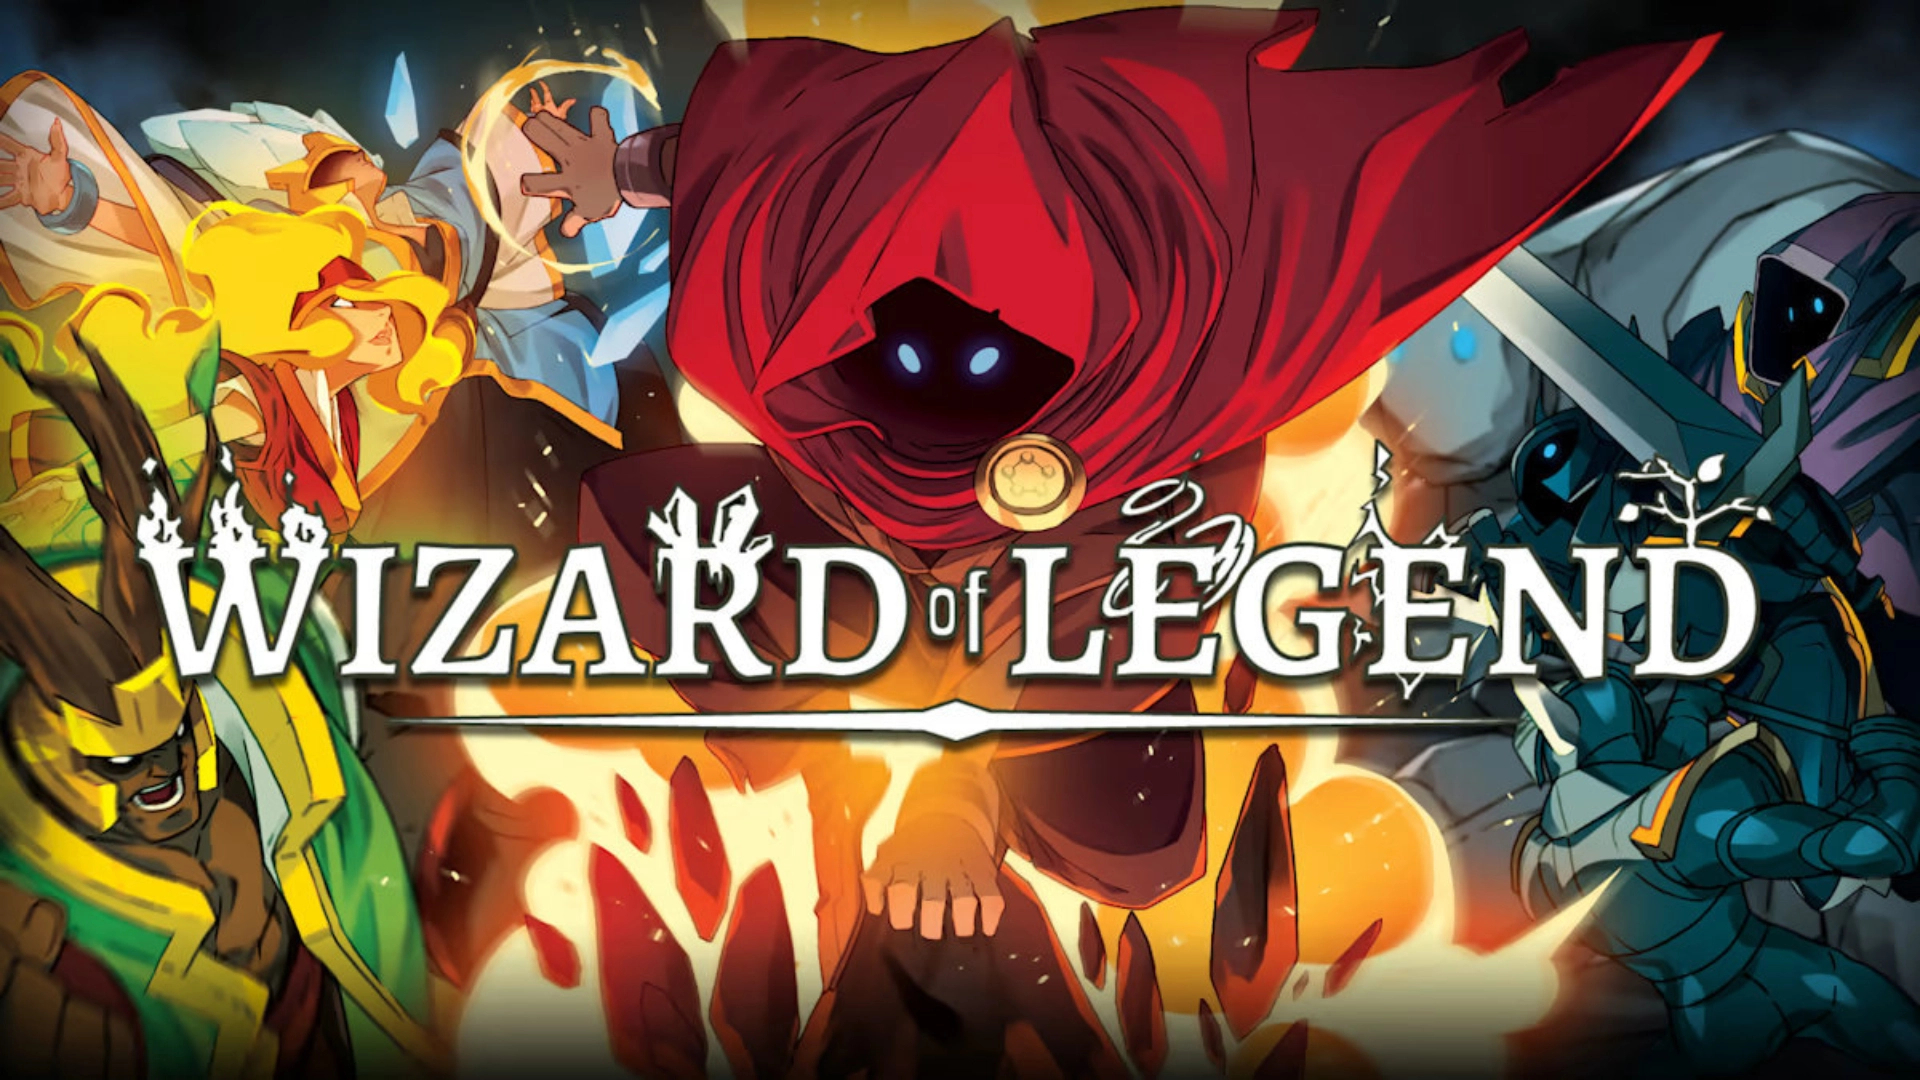 Best Wizard Games: Wizard of Legend.  The photo shows the game logo in front of the flame and a strange masked figure.